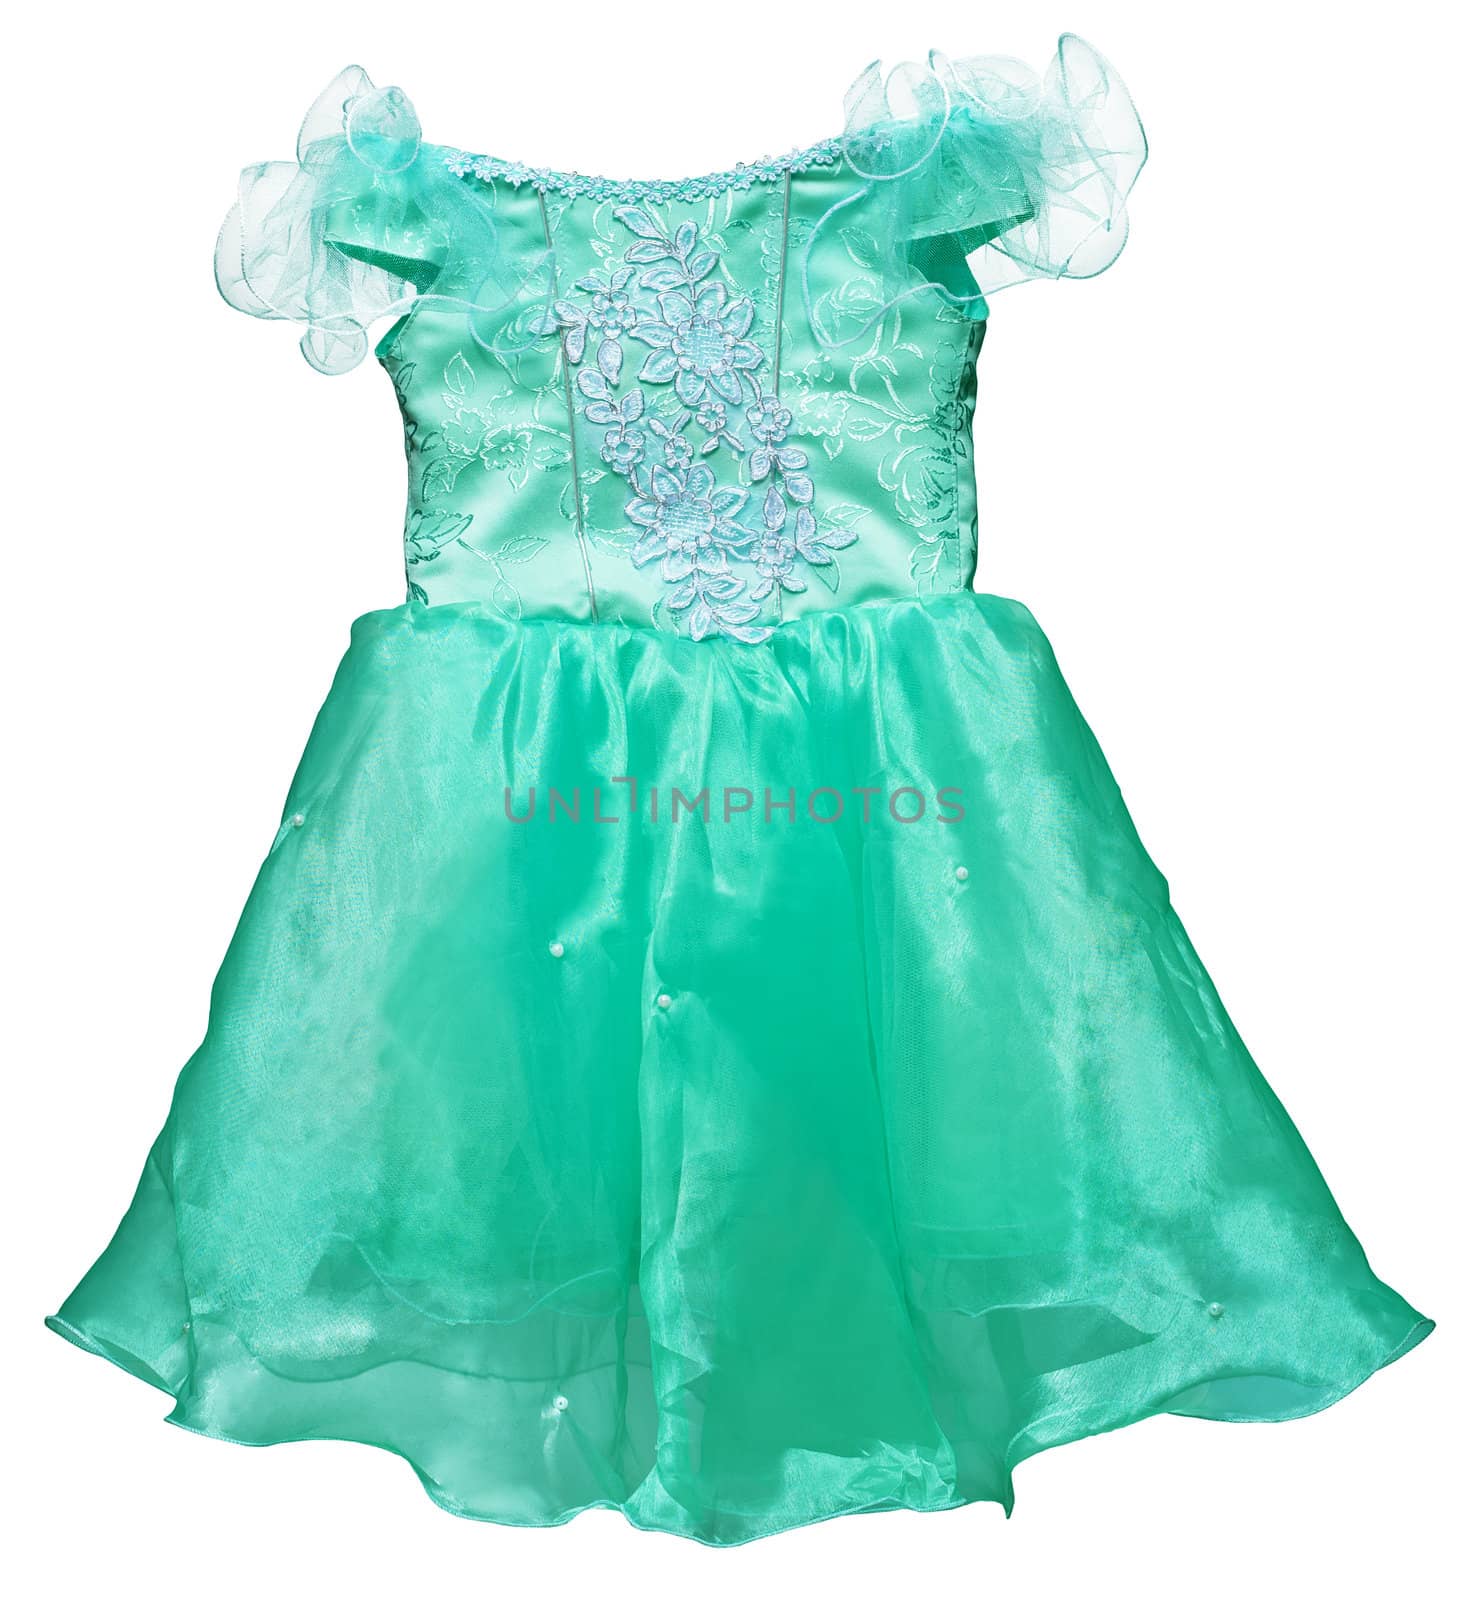 Simple green dress for little girl on white by pzaxe